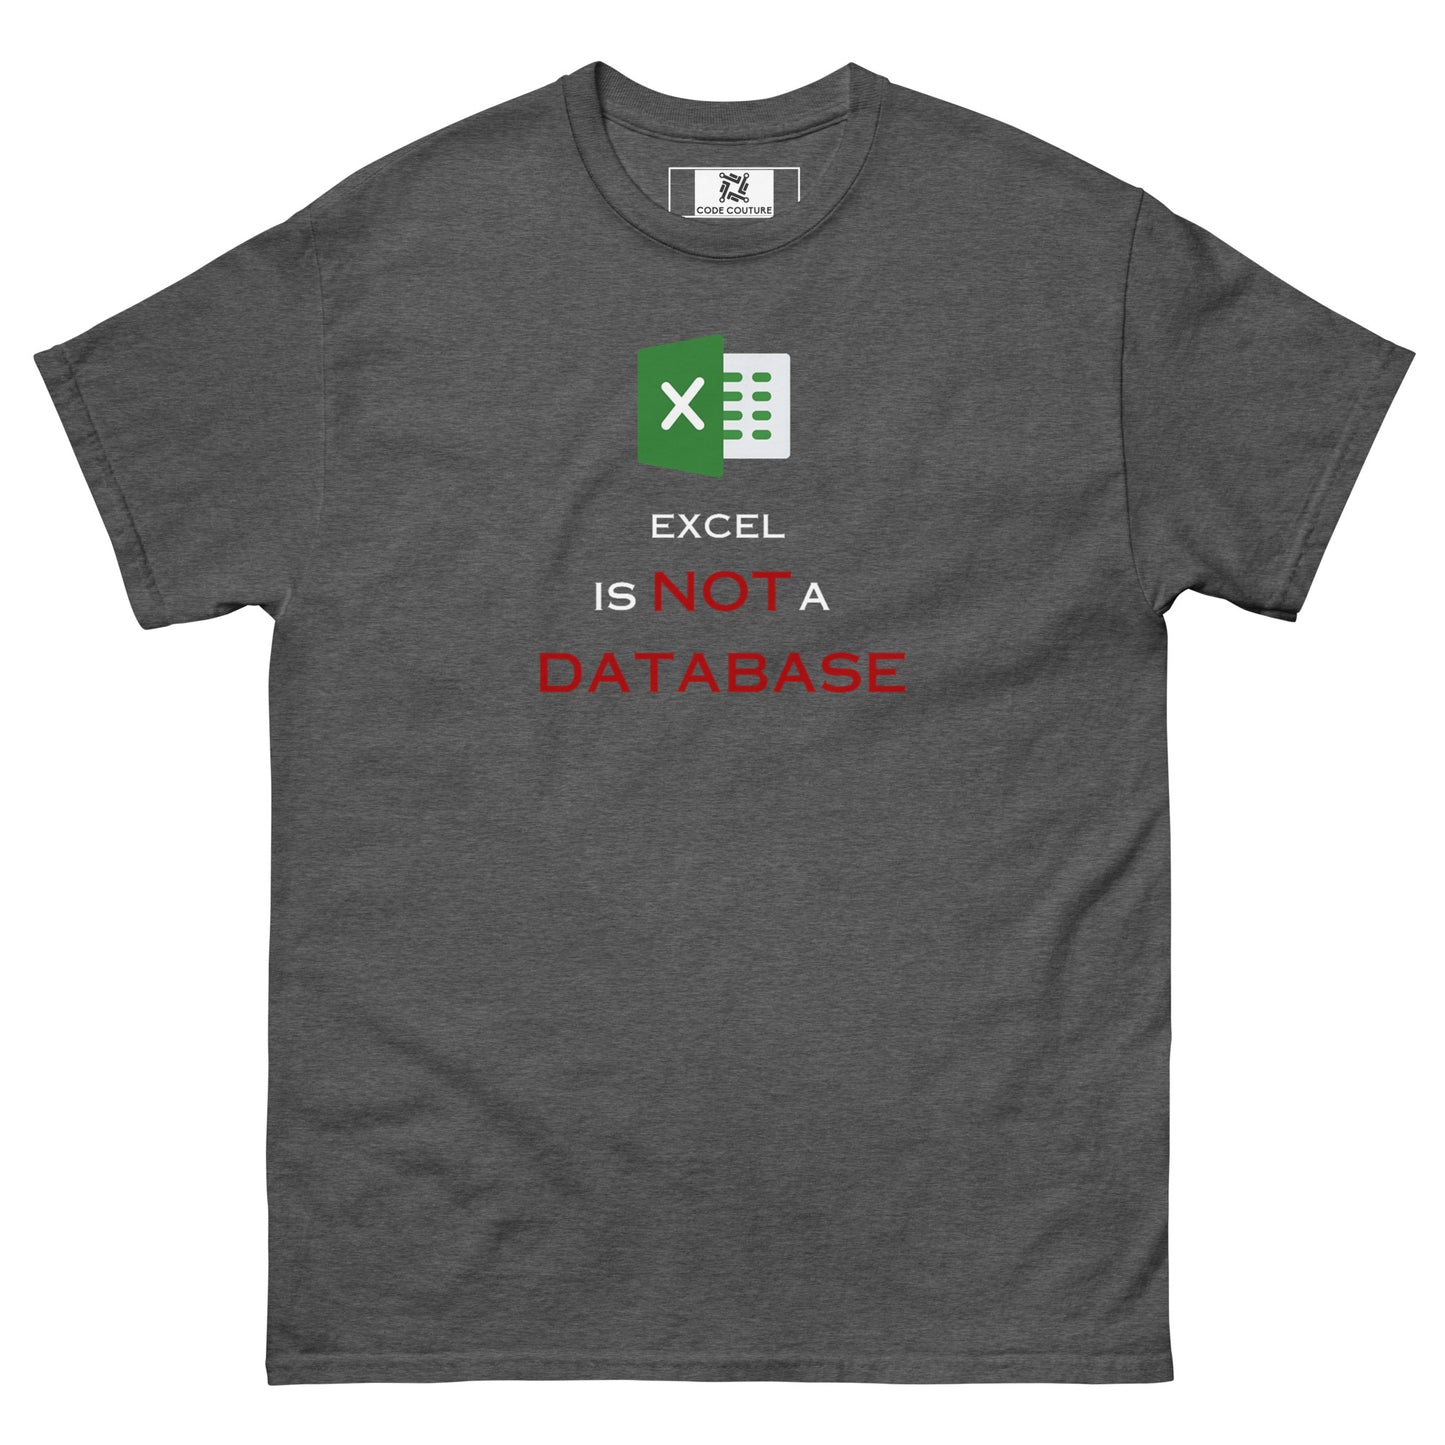 Excel Not a DB classic tee - Dark